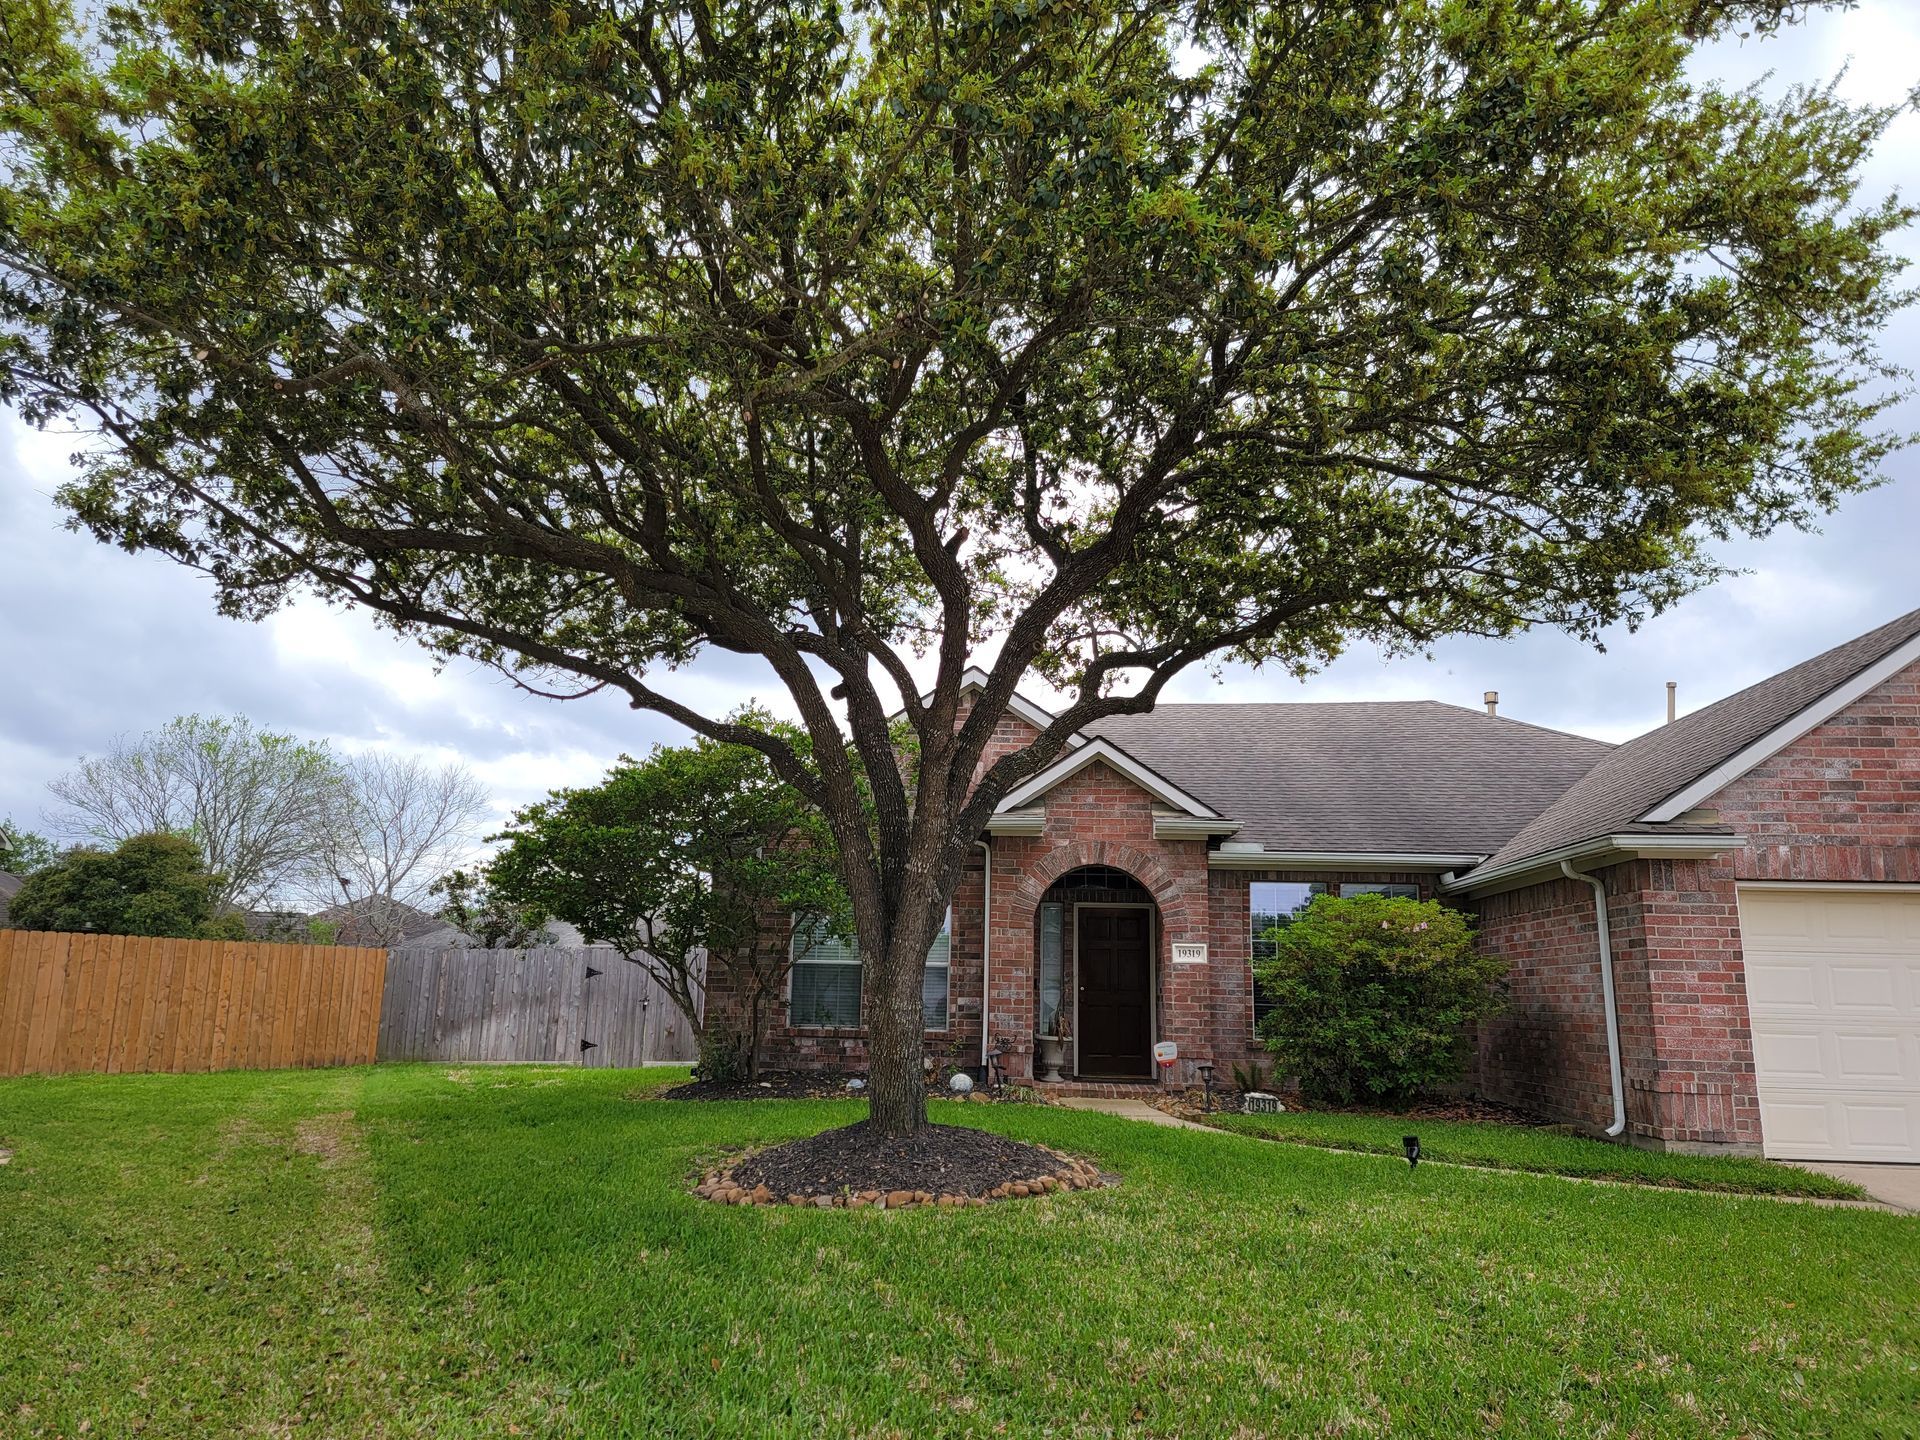 Tree Trimming - Before and After | Texas Tree Care